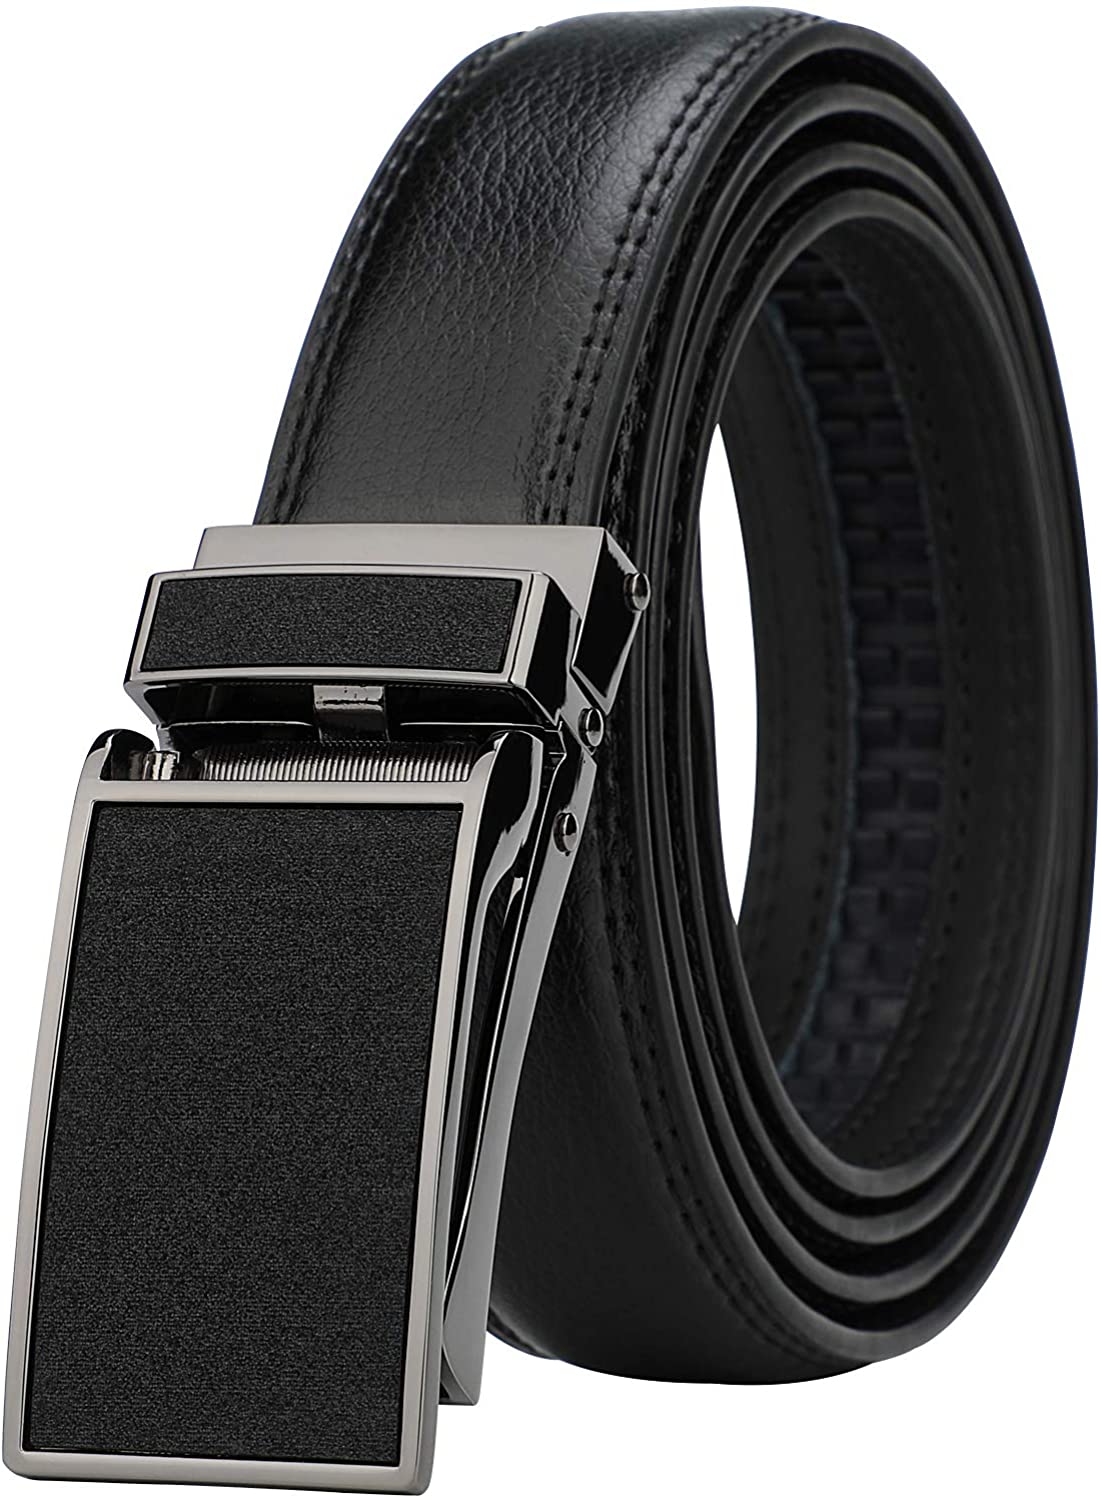 HIMI Mens Comfort Genuine Leather Ratchet Dress Belt with Automatic Click Buckle